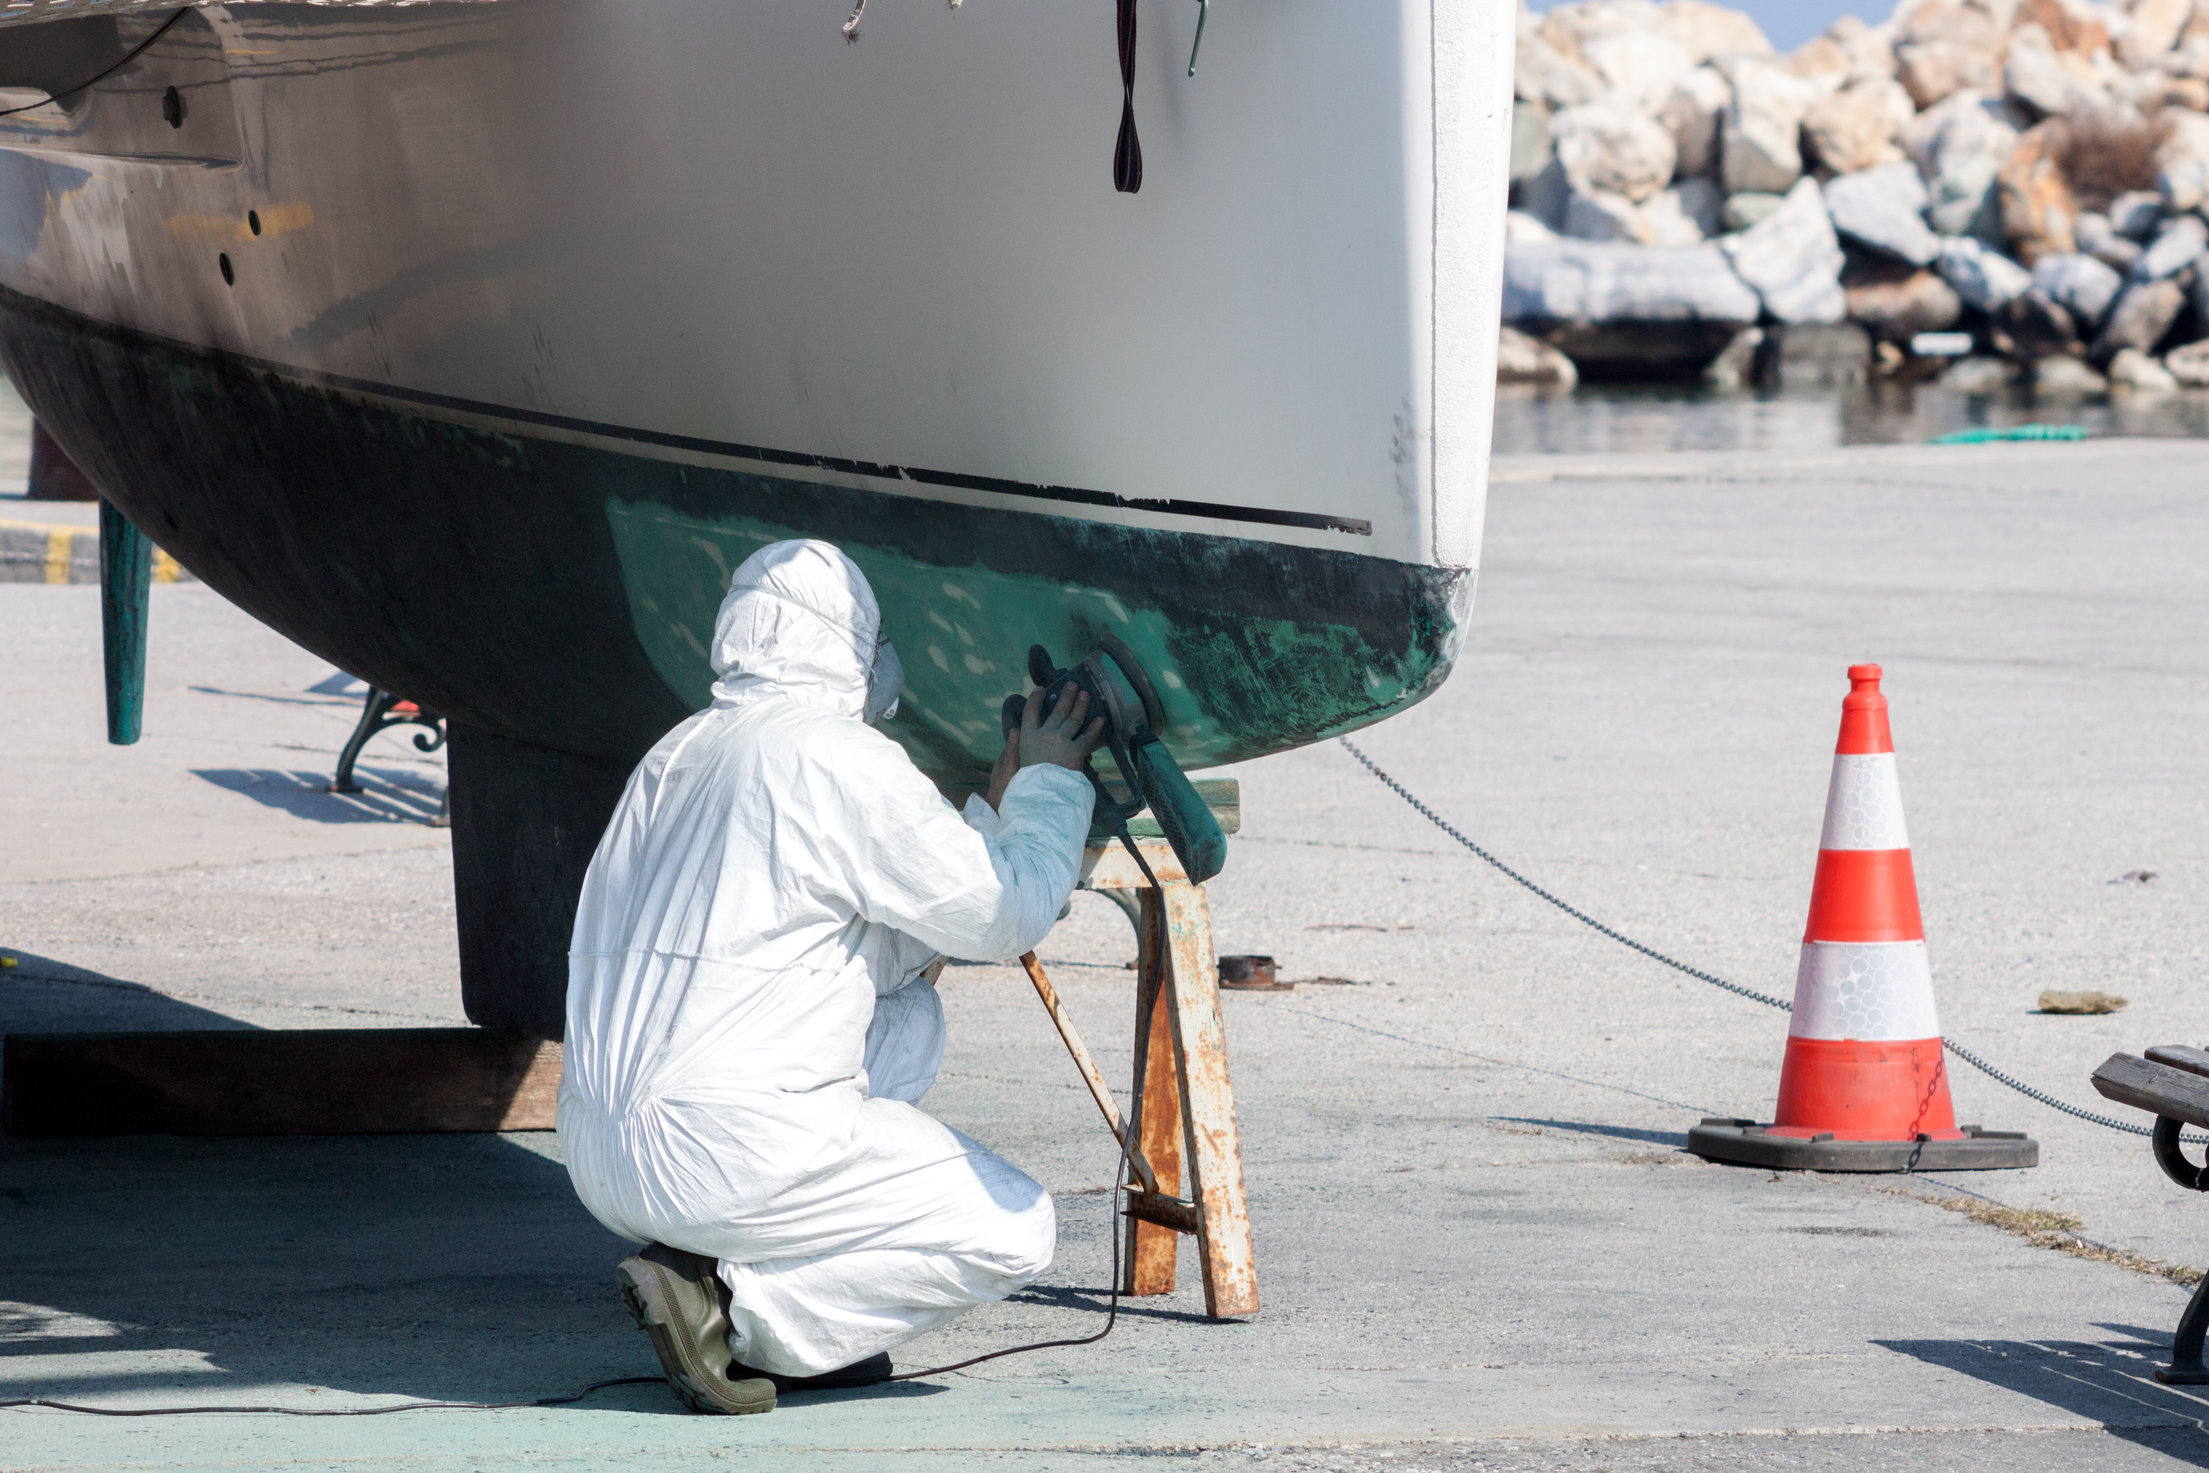 Worker wearing protection suit and mask is sanding down old paint from catamaran